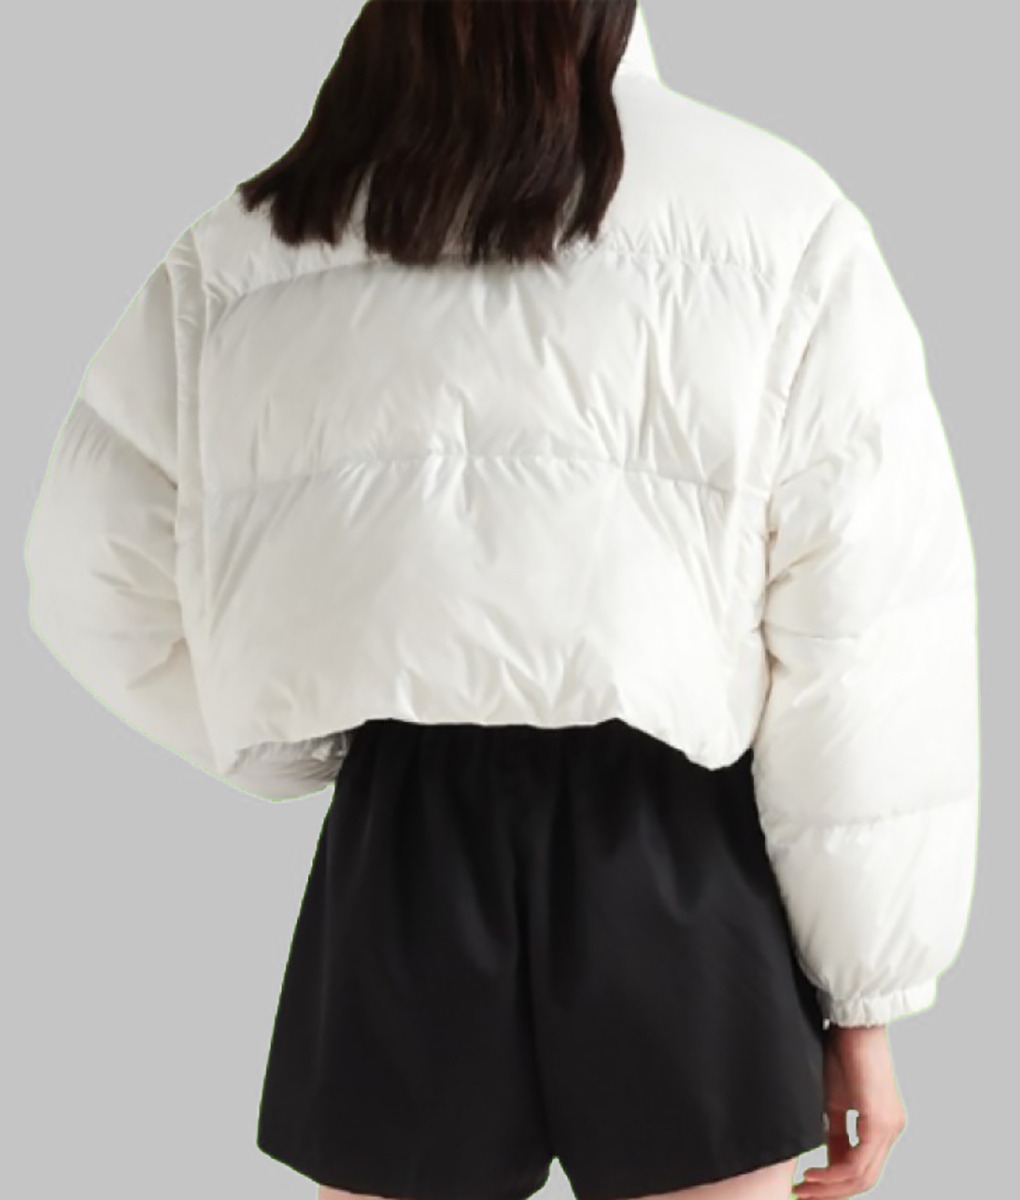 Brittany Mahomes White Puffer Jacket (1)